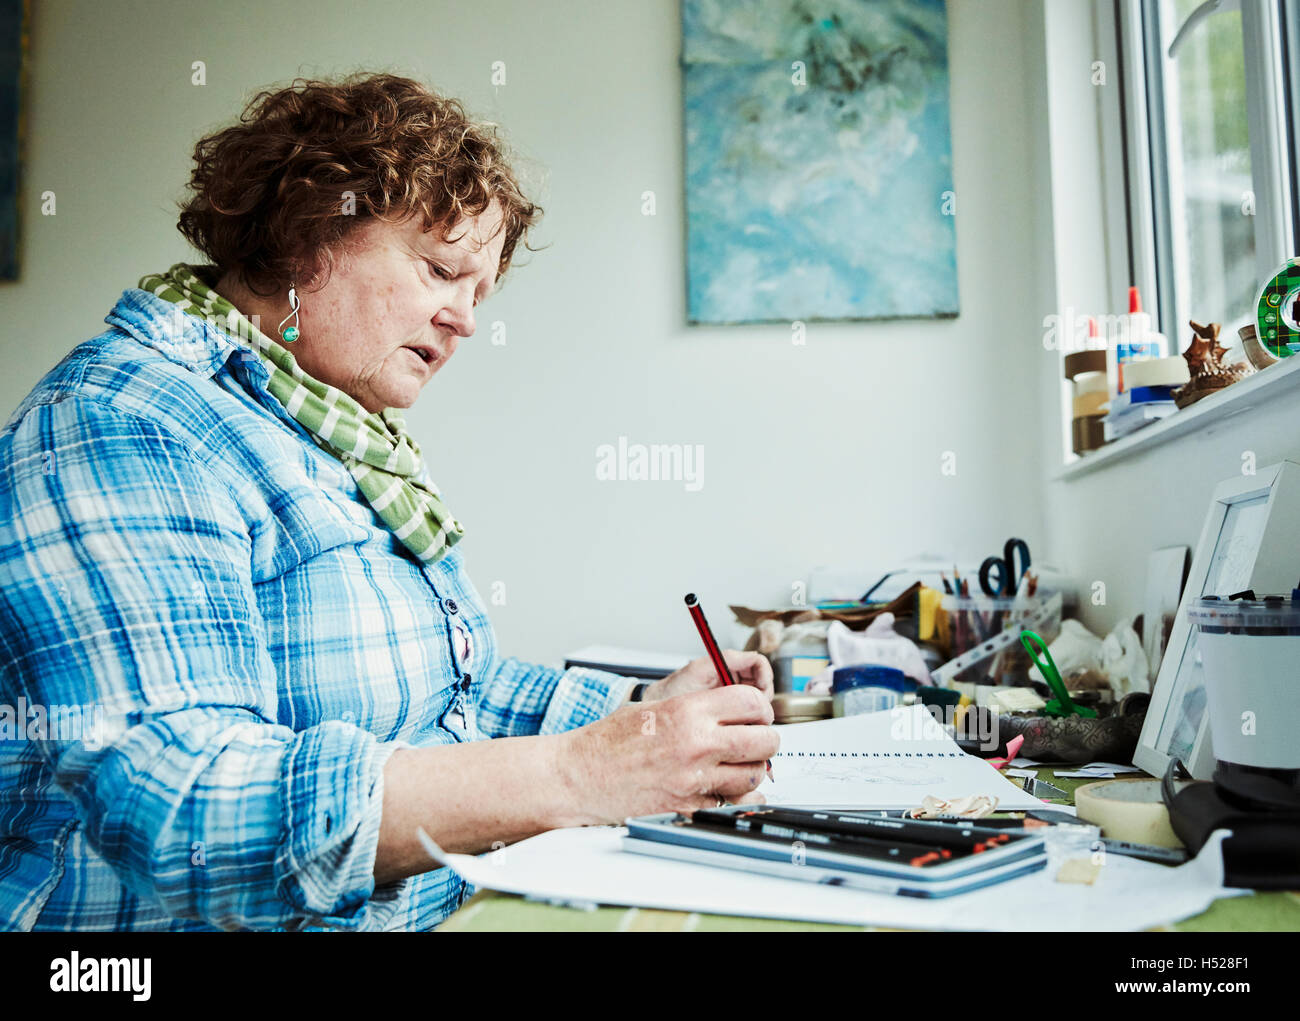 A woman artist working at a table holding a pencil drawing on paper. Stock Photo